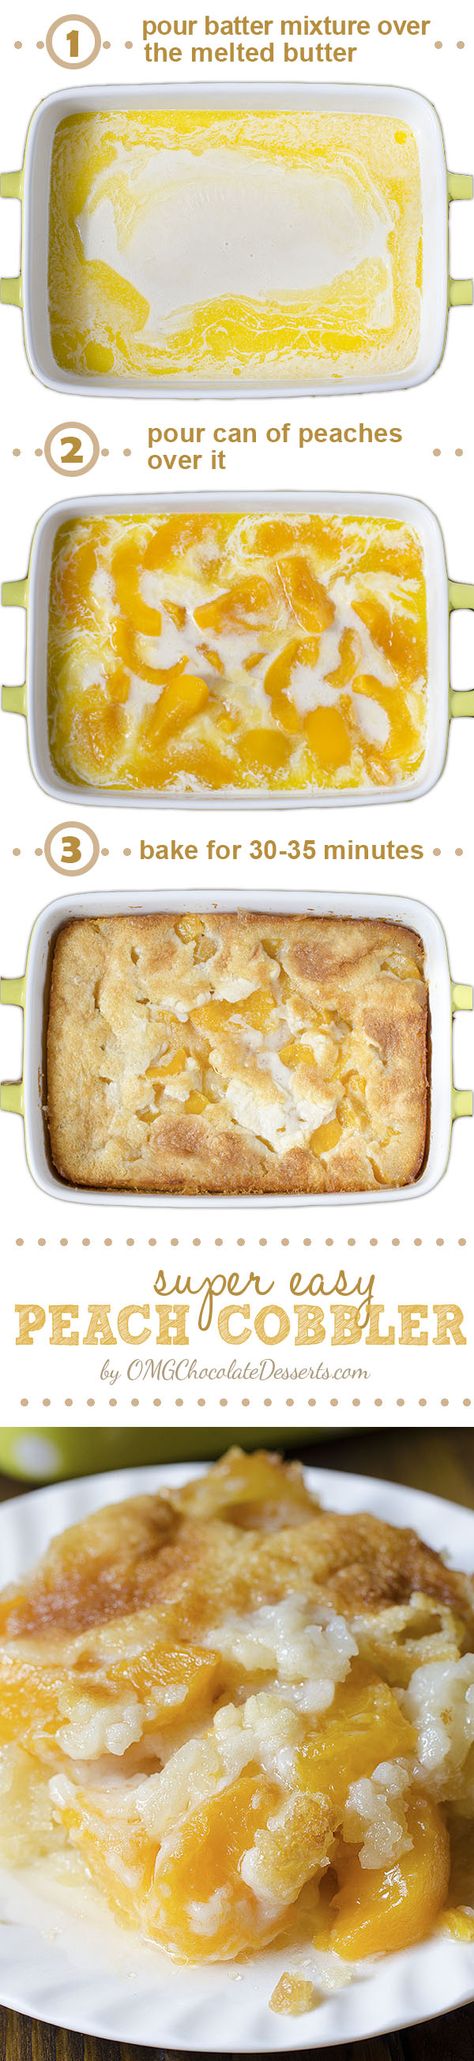 There are three reasons why this fantastic Peach Cobbler can become one of your favorite recipes – it’s super tasty, super simple and super economical. Easy Peach Cobbler Recipe, Cobbler Easy, Peach Cobblers, Peach Cobbler Easy, Cobbler Recipe, Dessert Aux Fruits, Peach Desserts, Peach Cobbler Recipe, Peach Recipe